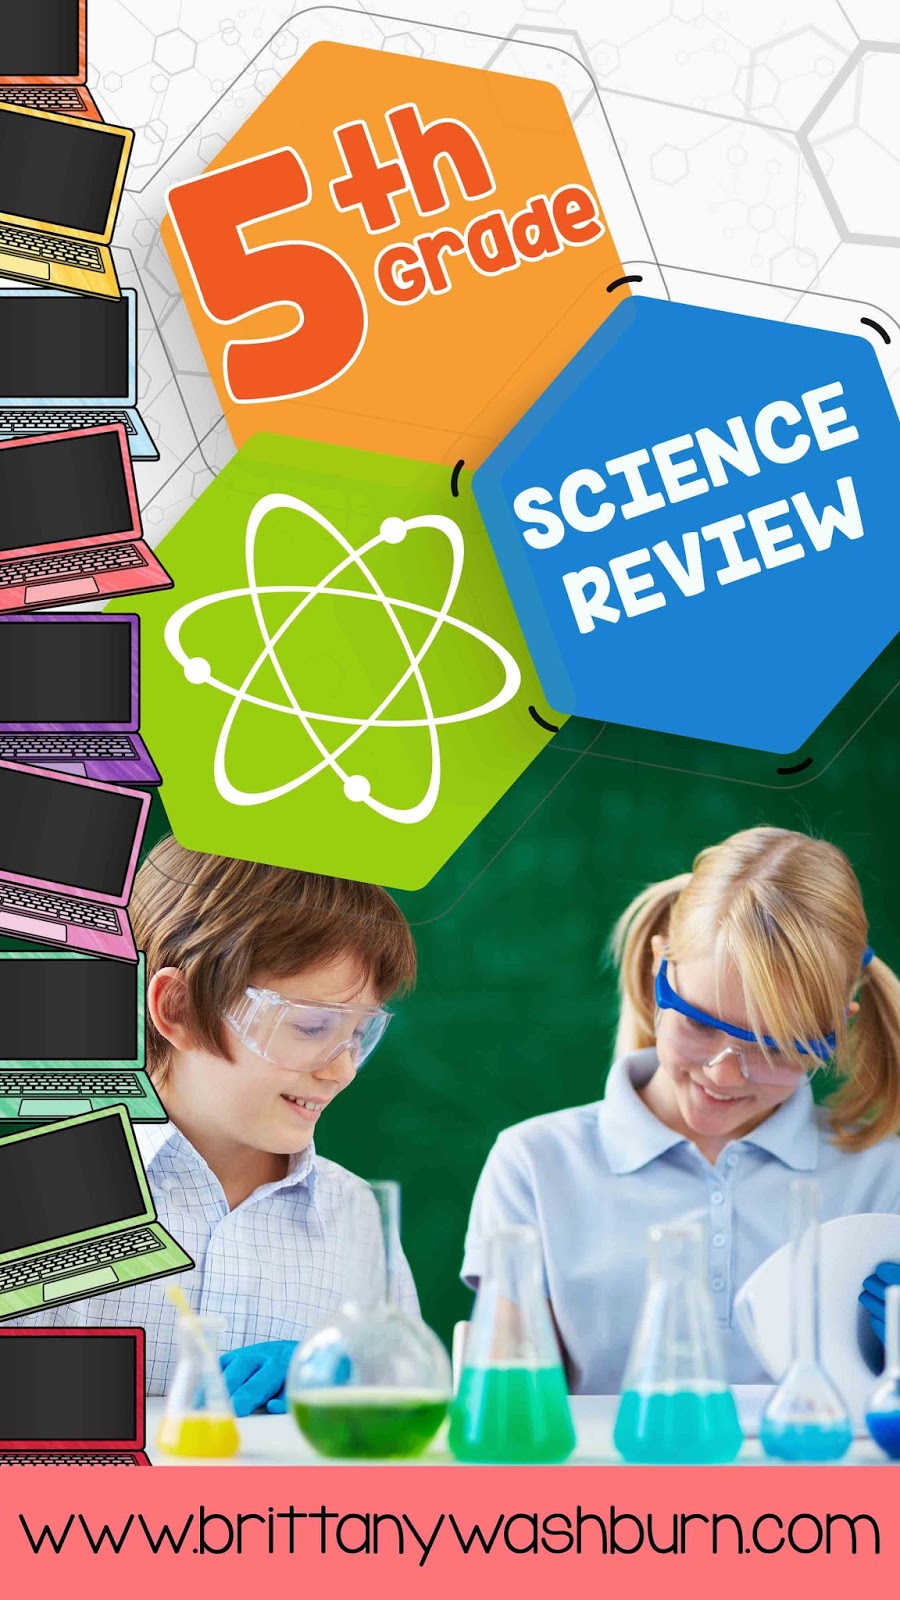 technology-teaching-resources-with-brittany-washburn-engaging-5th-grade-science-review-that